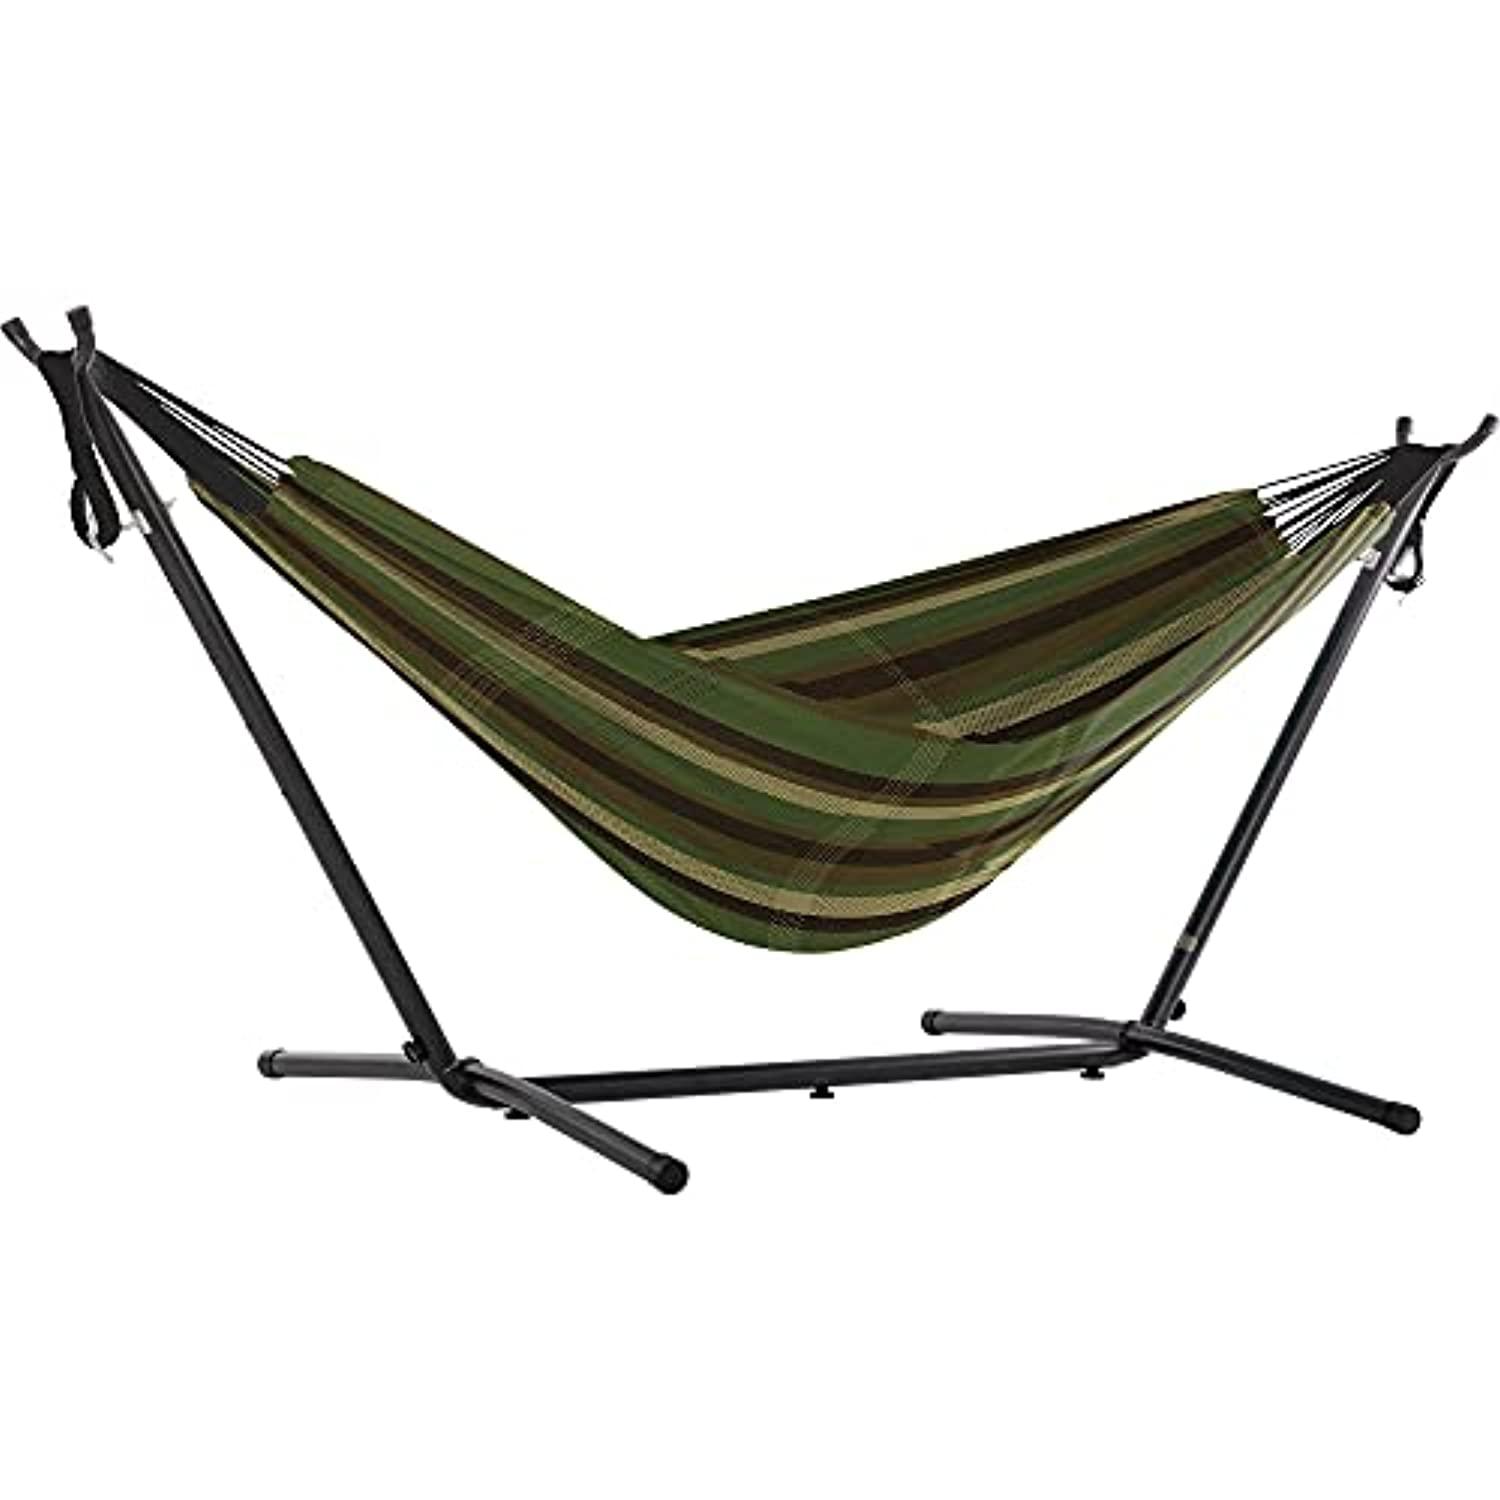 vivere uhsdo9-41 hammock with stand, frontier camo